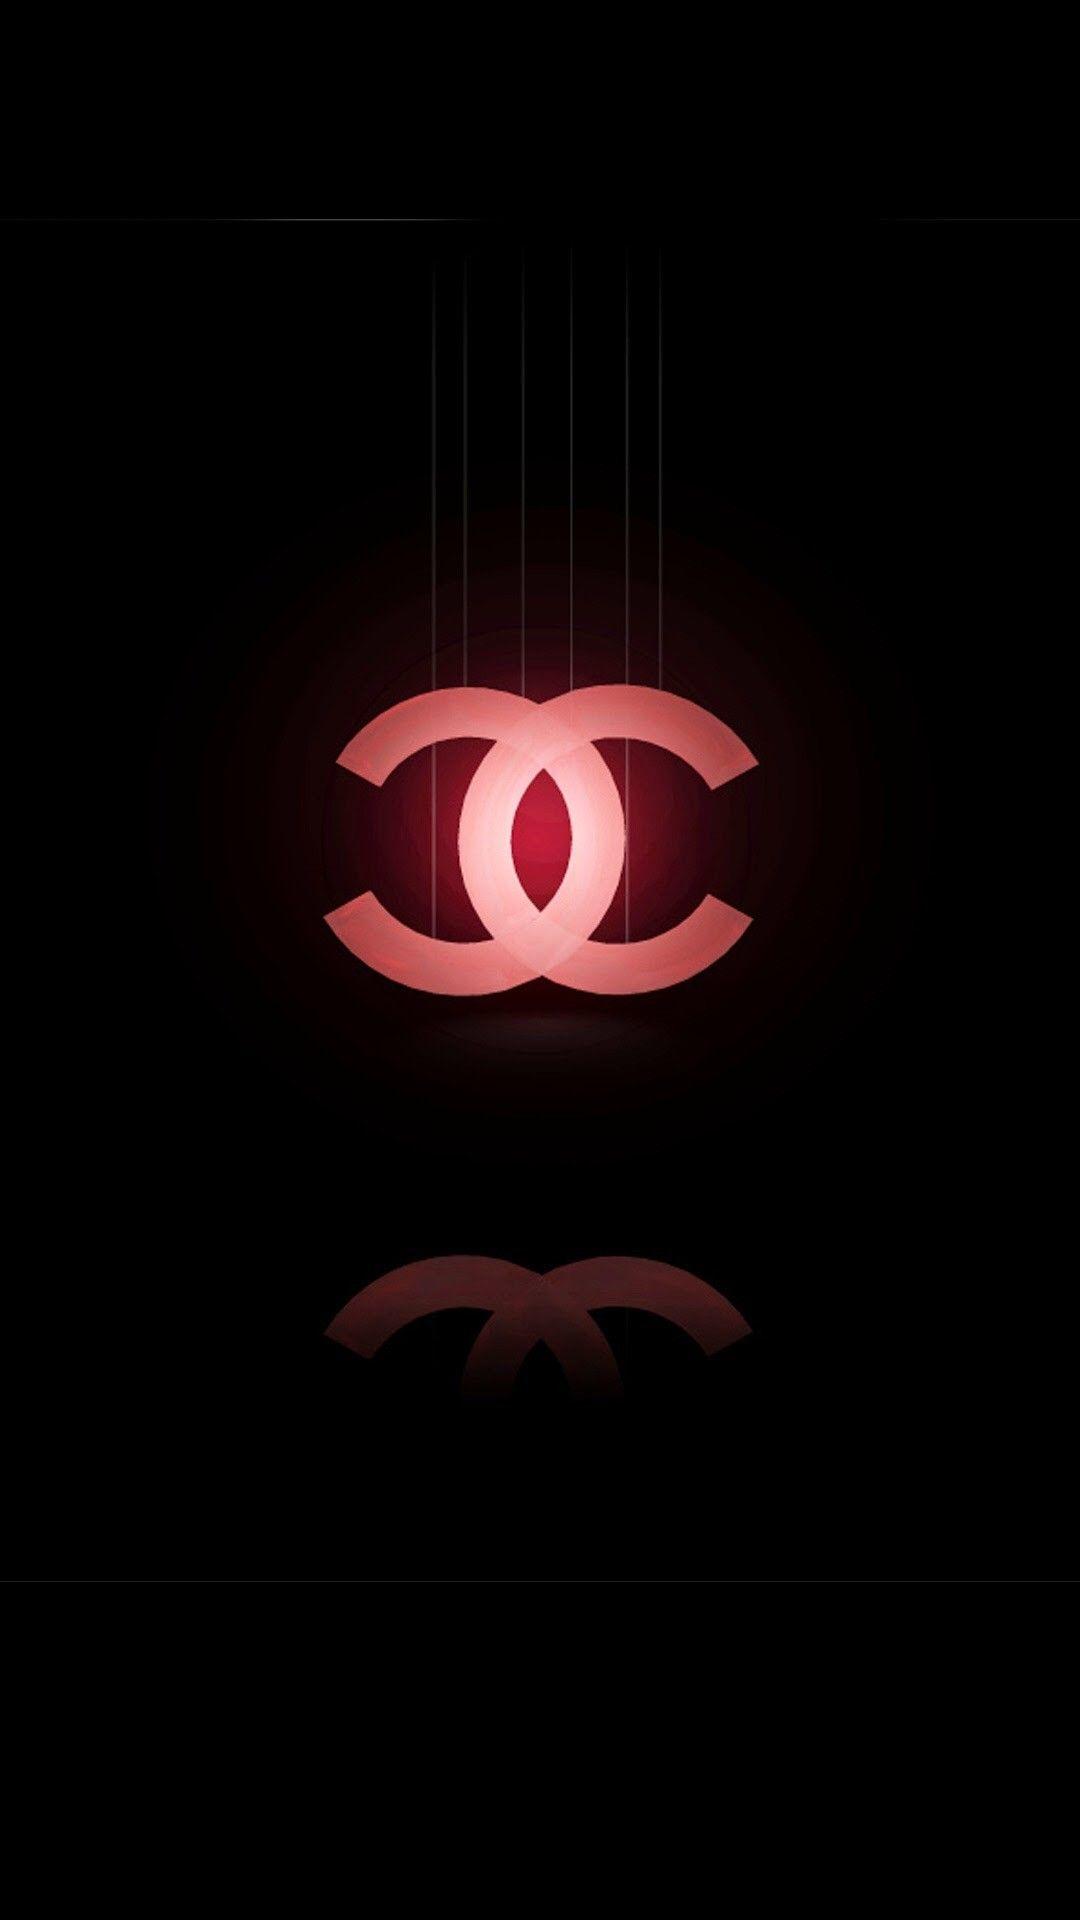 Chanel Iphone Wallpapers Top Free Chanel Iphone Backgrounds Wallpaperaccess